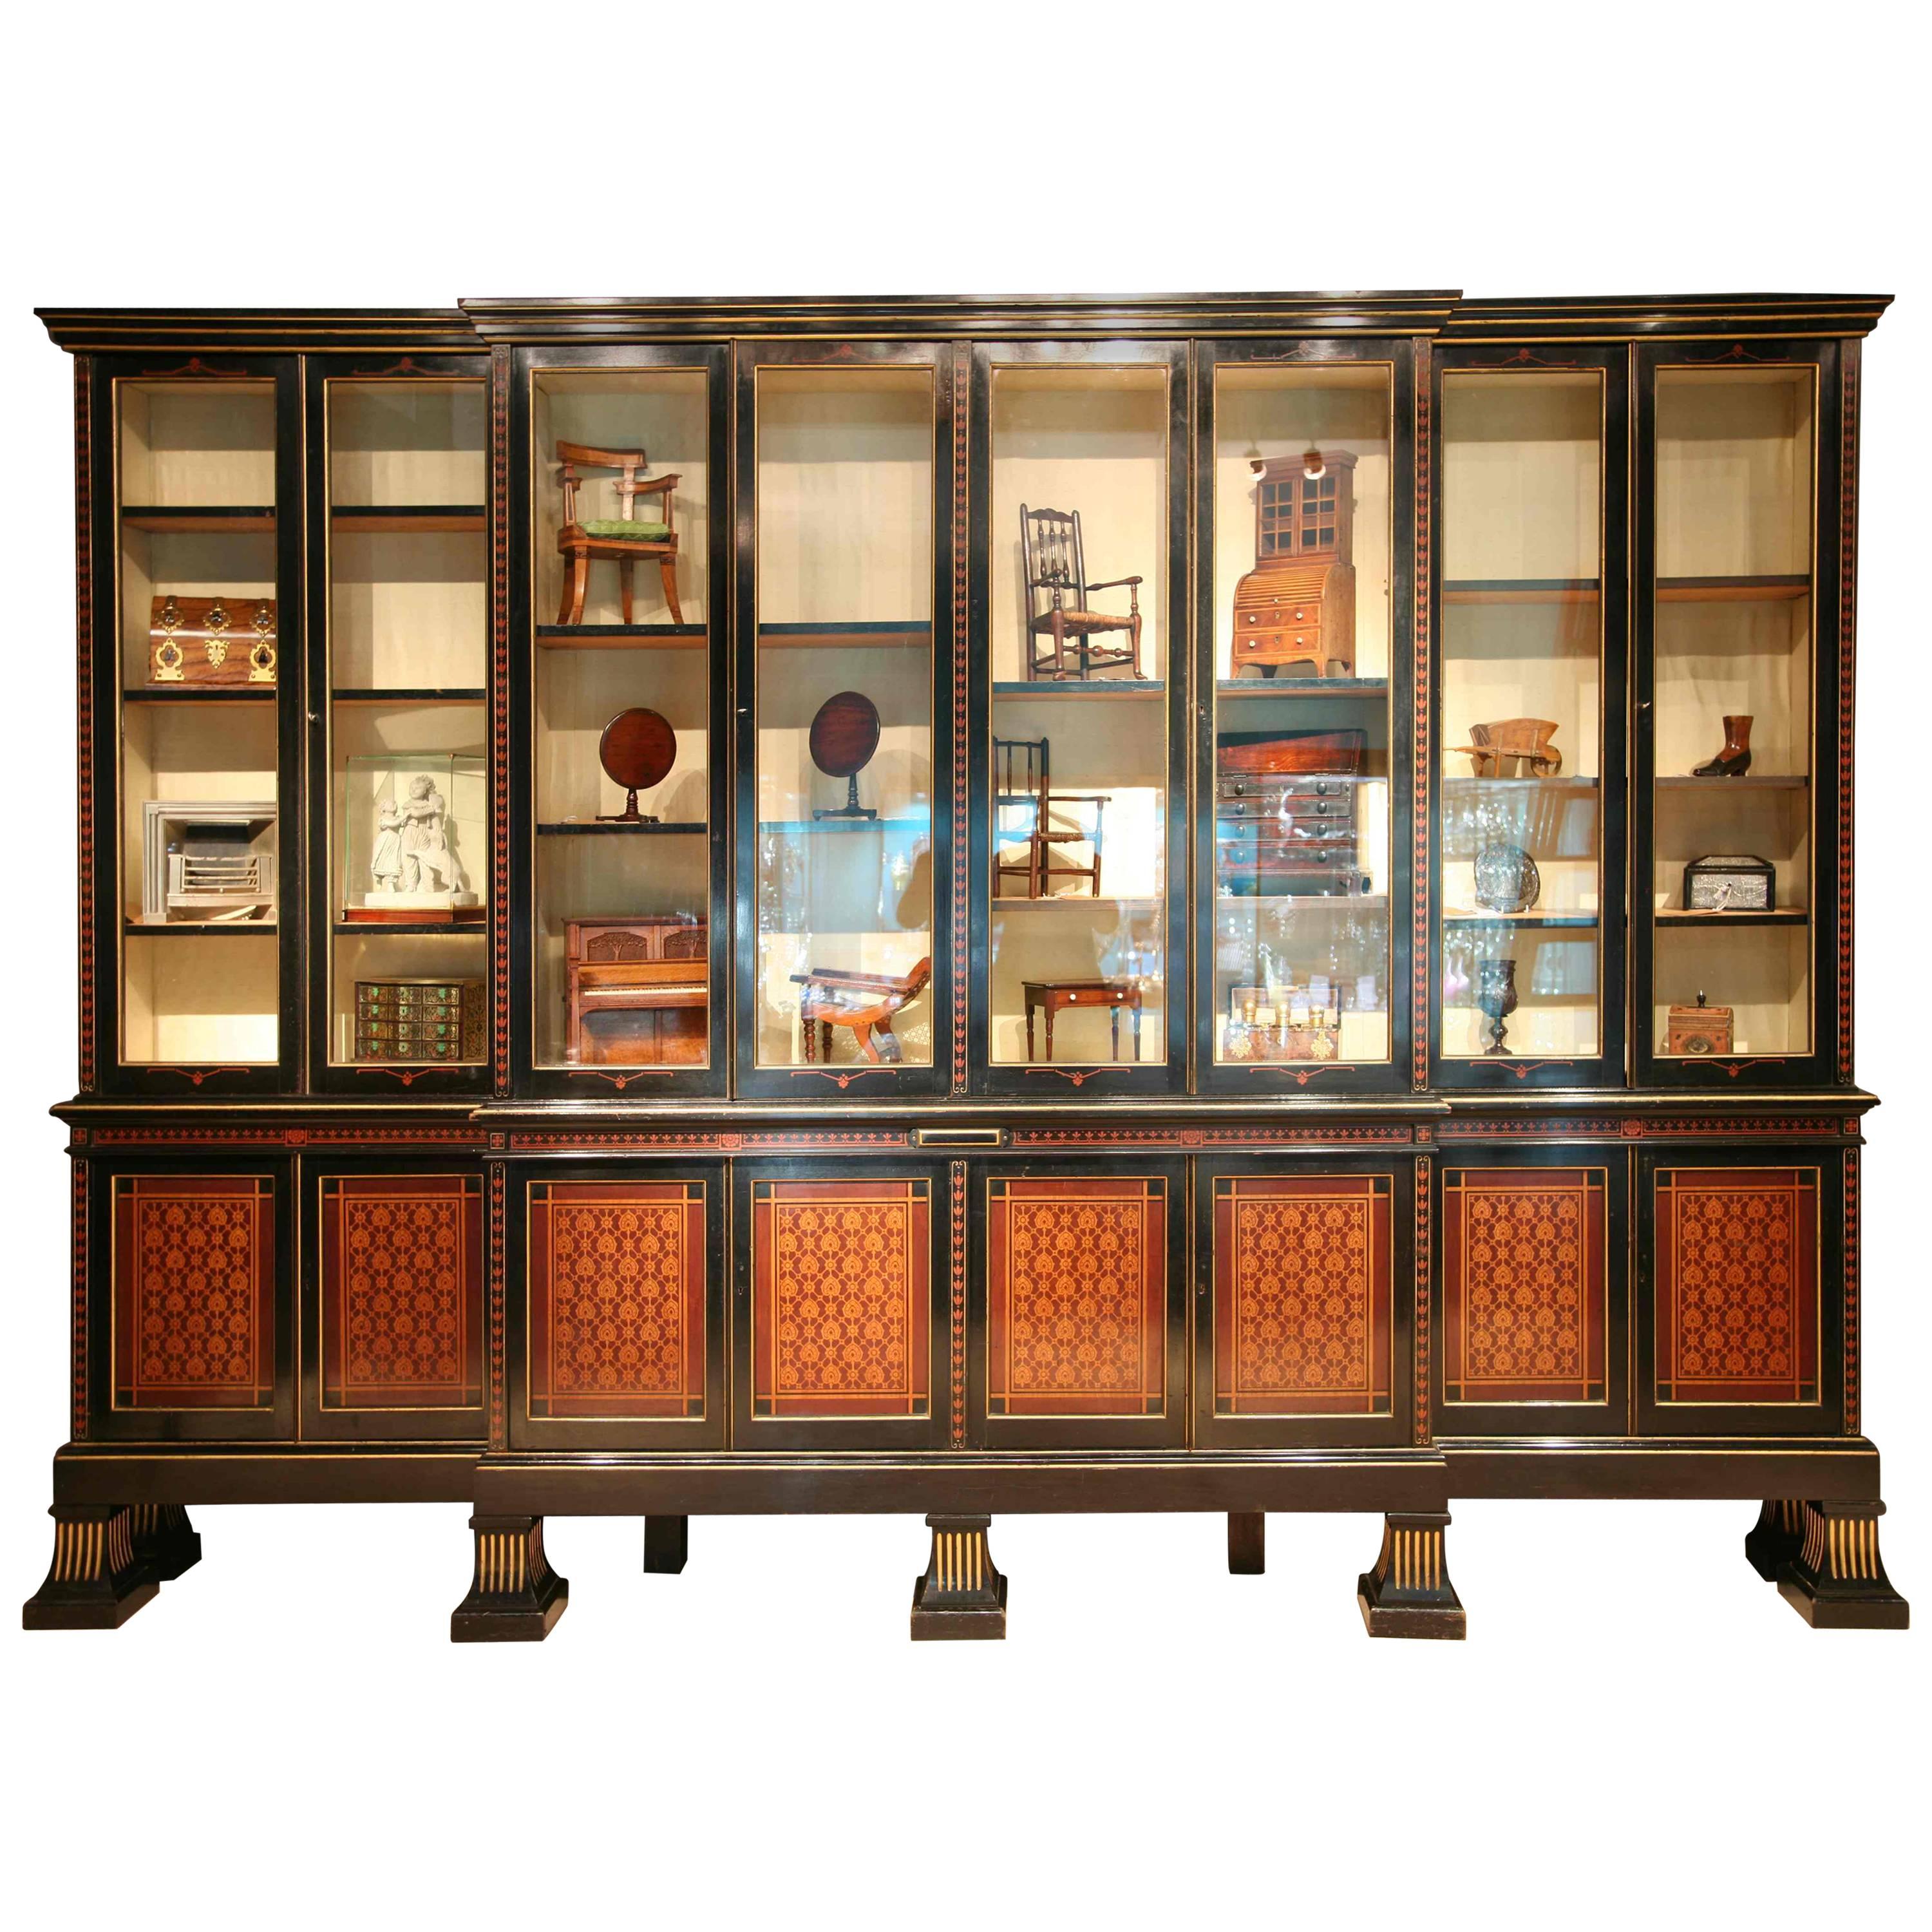 Imposing Arts and Crafts Breakfront Bookcase Attributed, Gillows Lancaster, 1878 For Sale